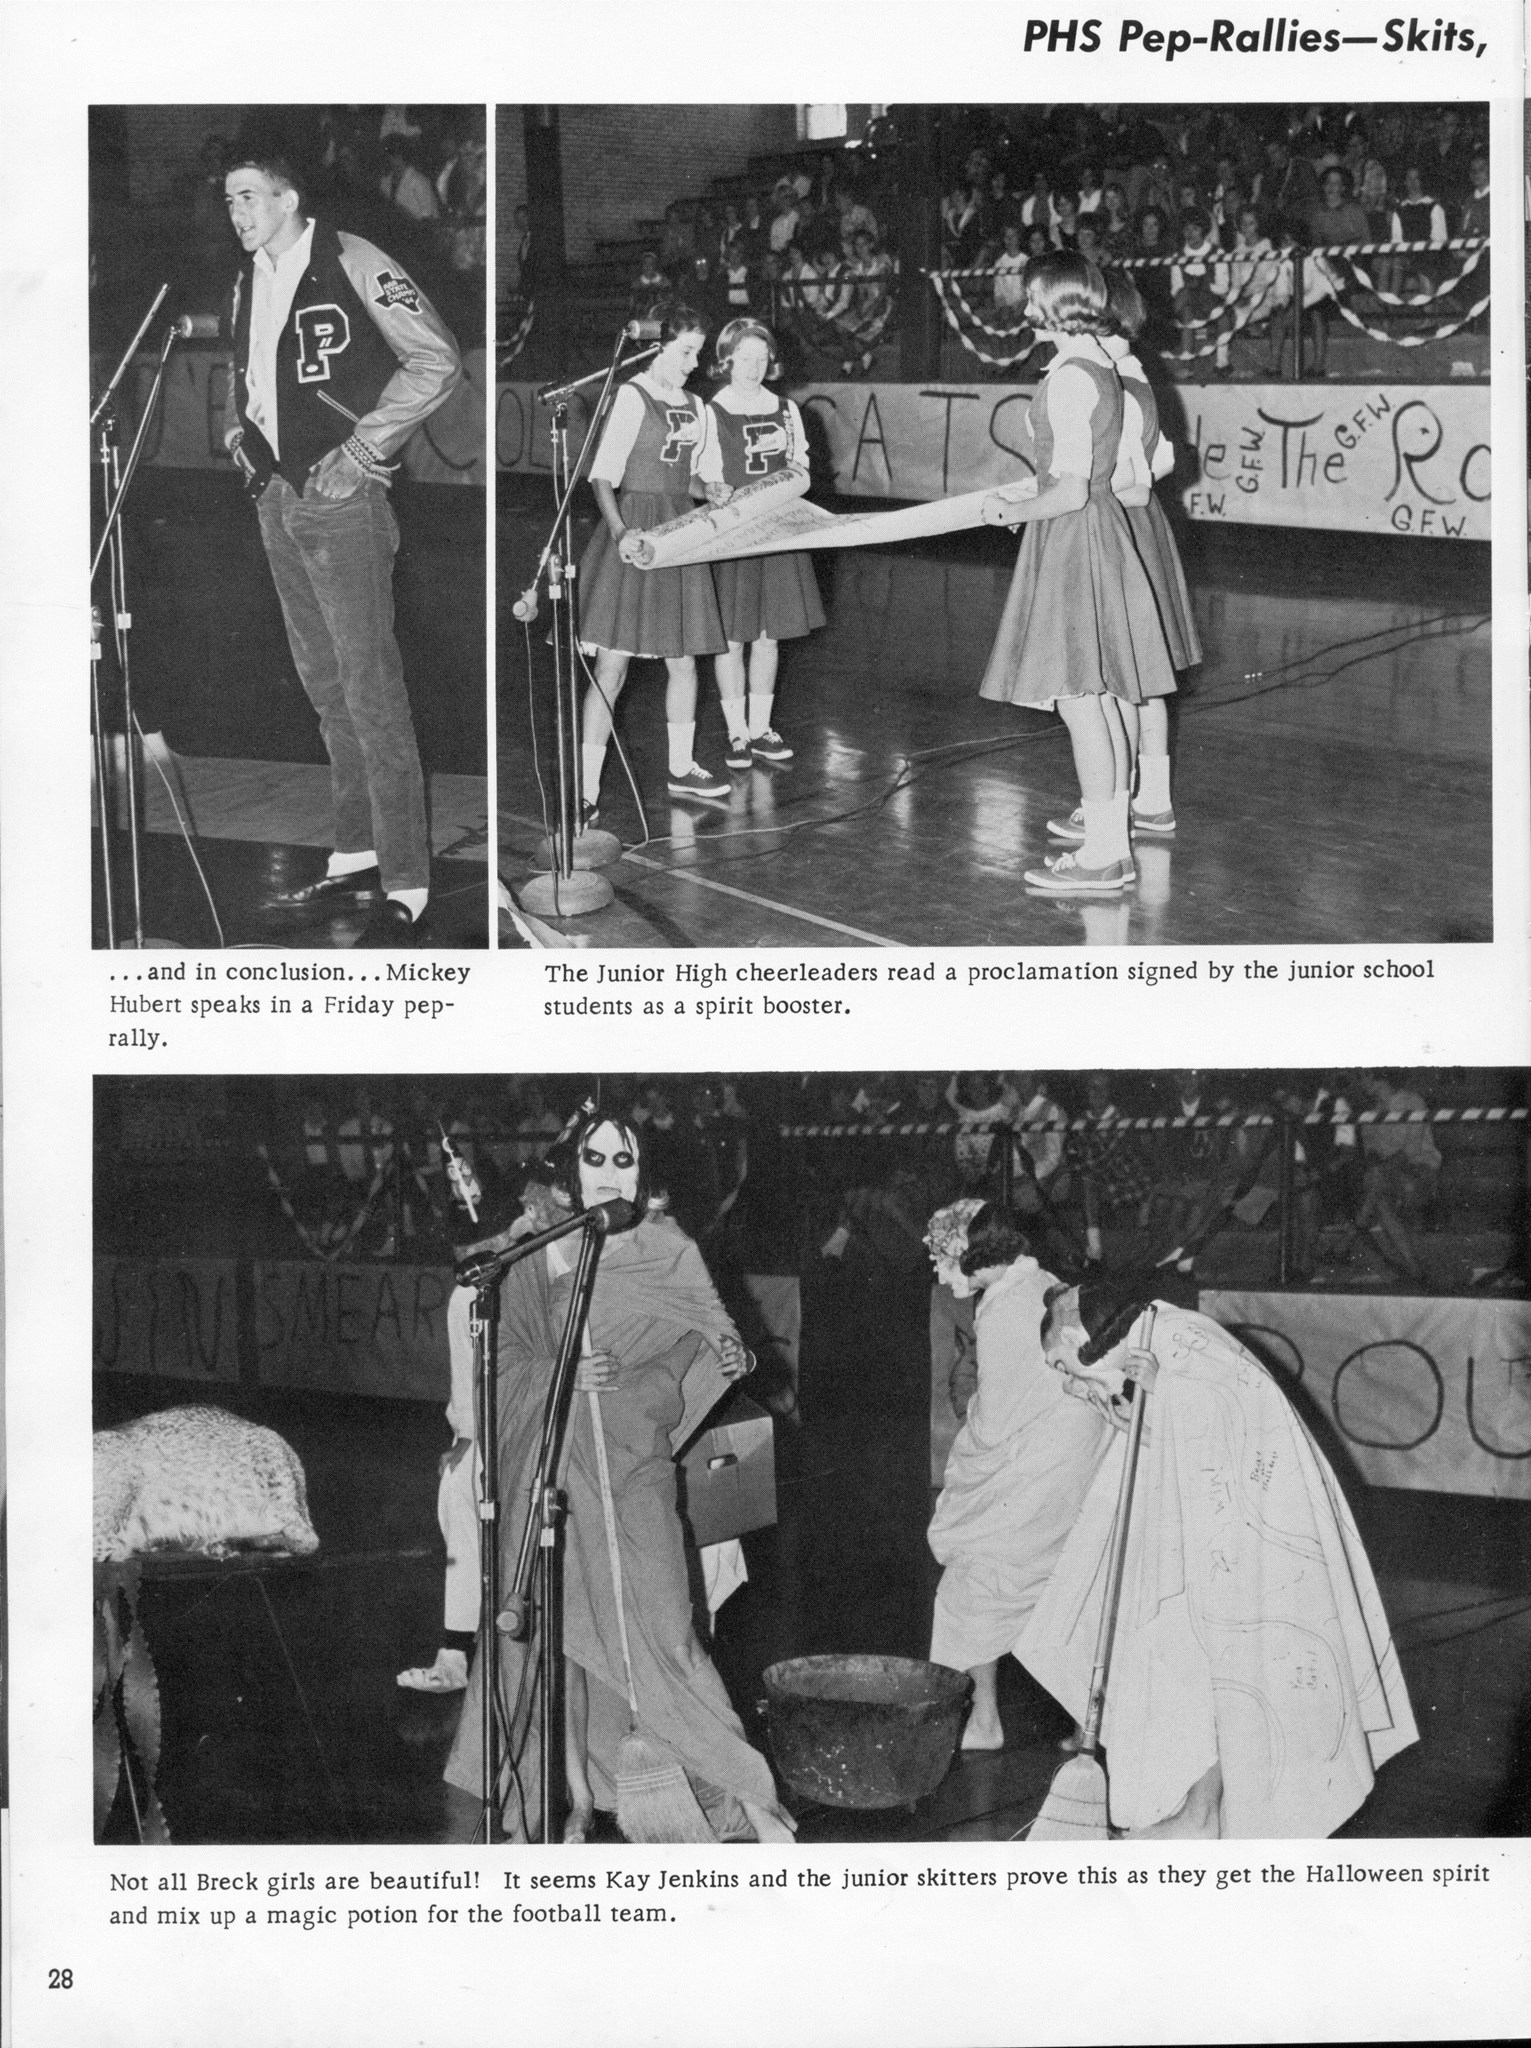 ../../../Images/Large/1966/Arclight-1966-pg0028.jpg